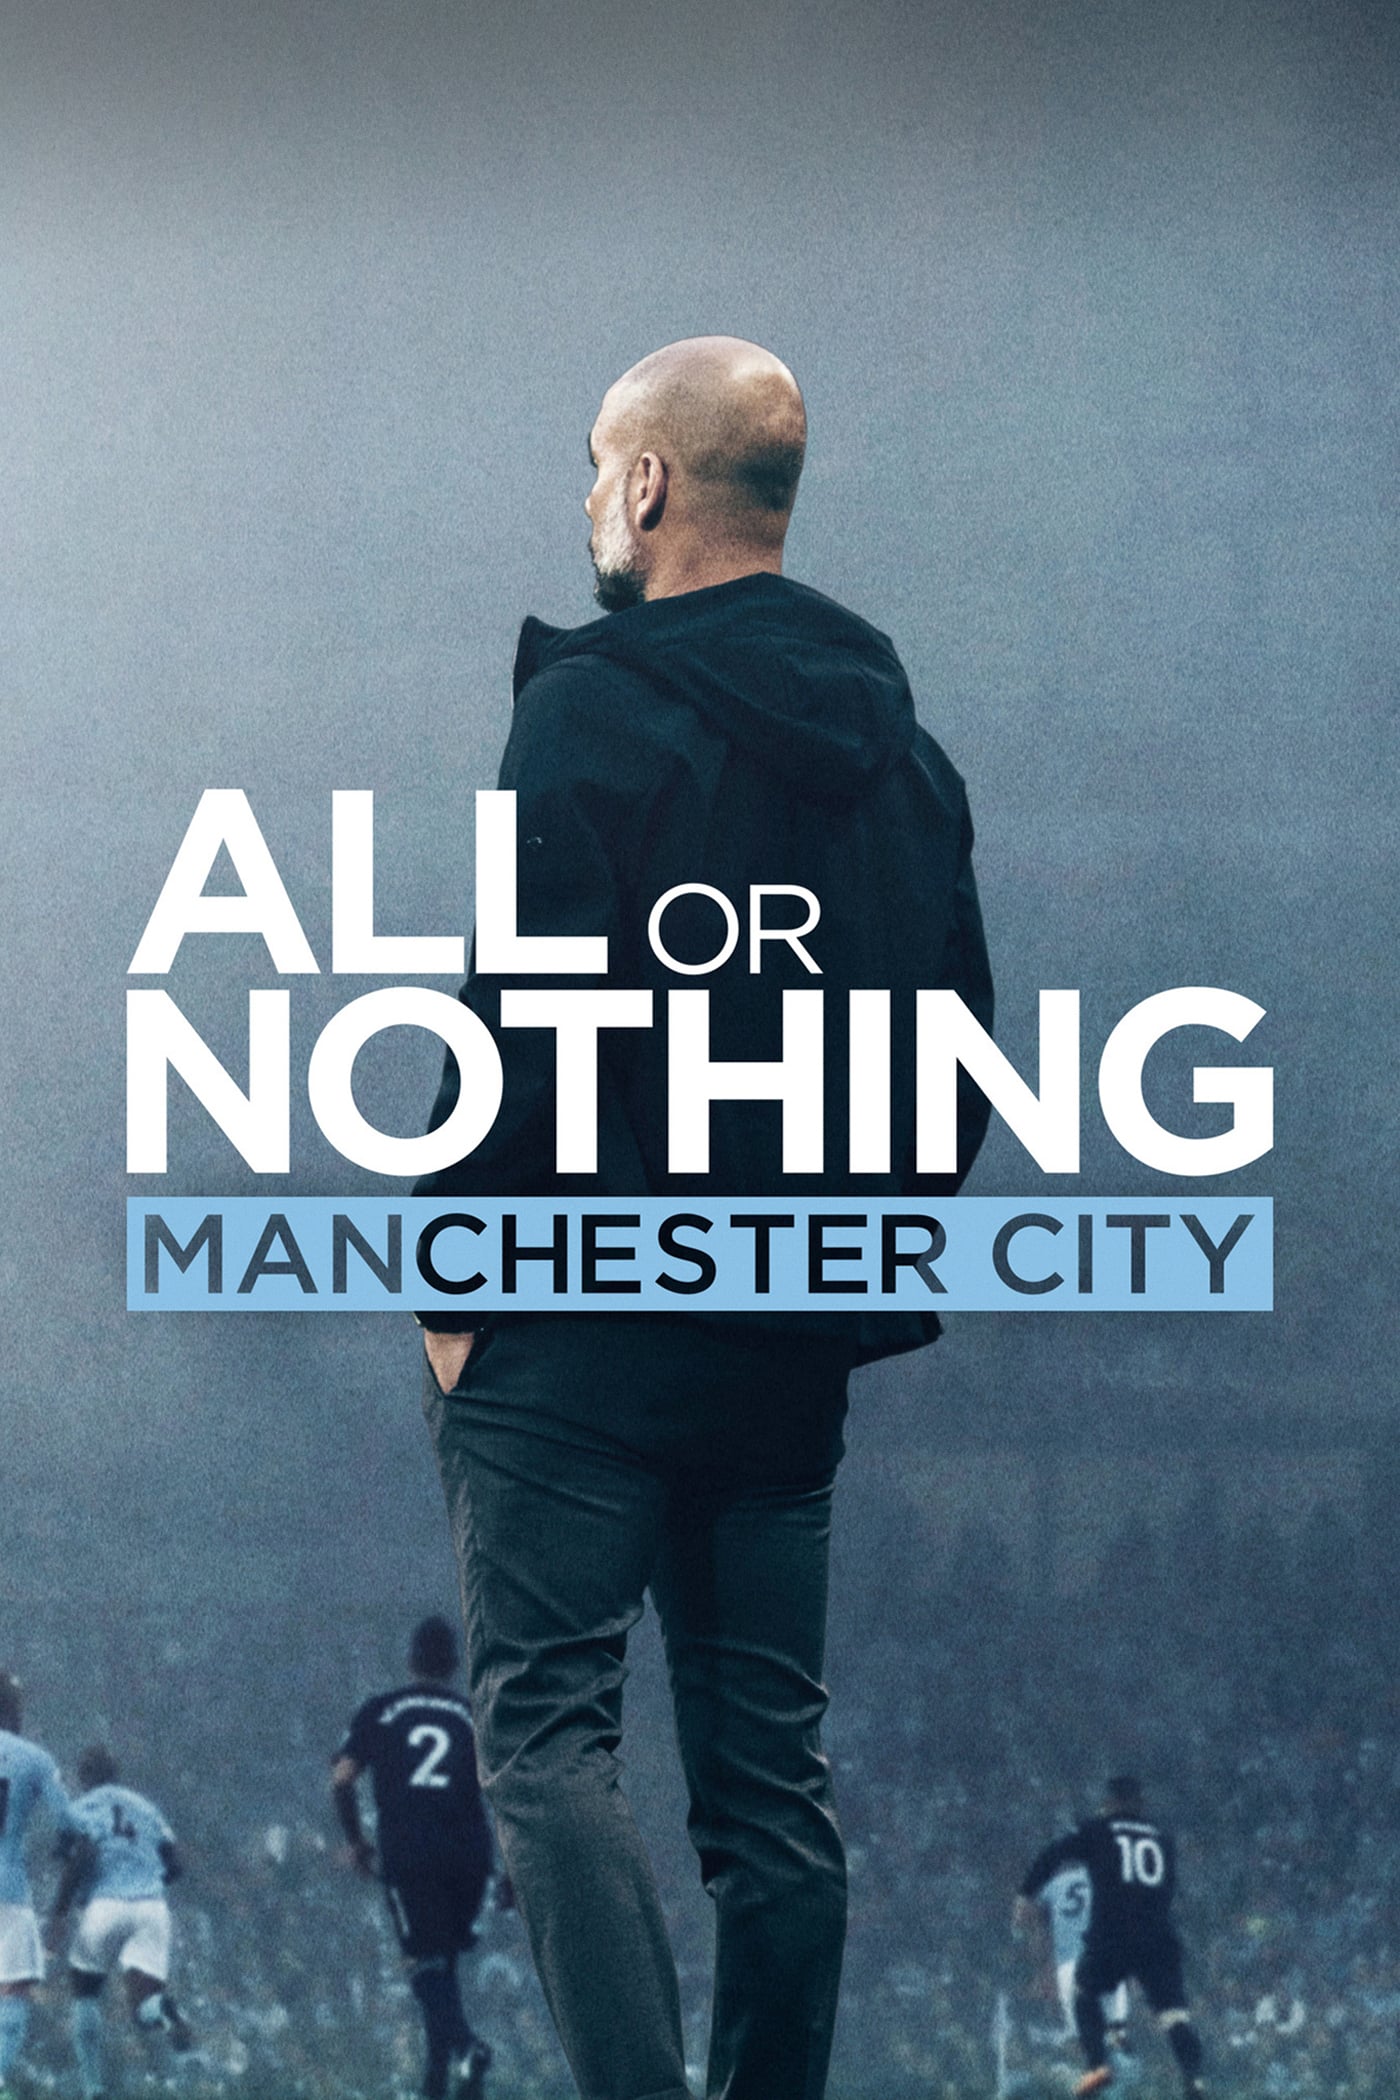 All or Nothing: Manchester City (2018)